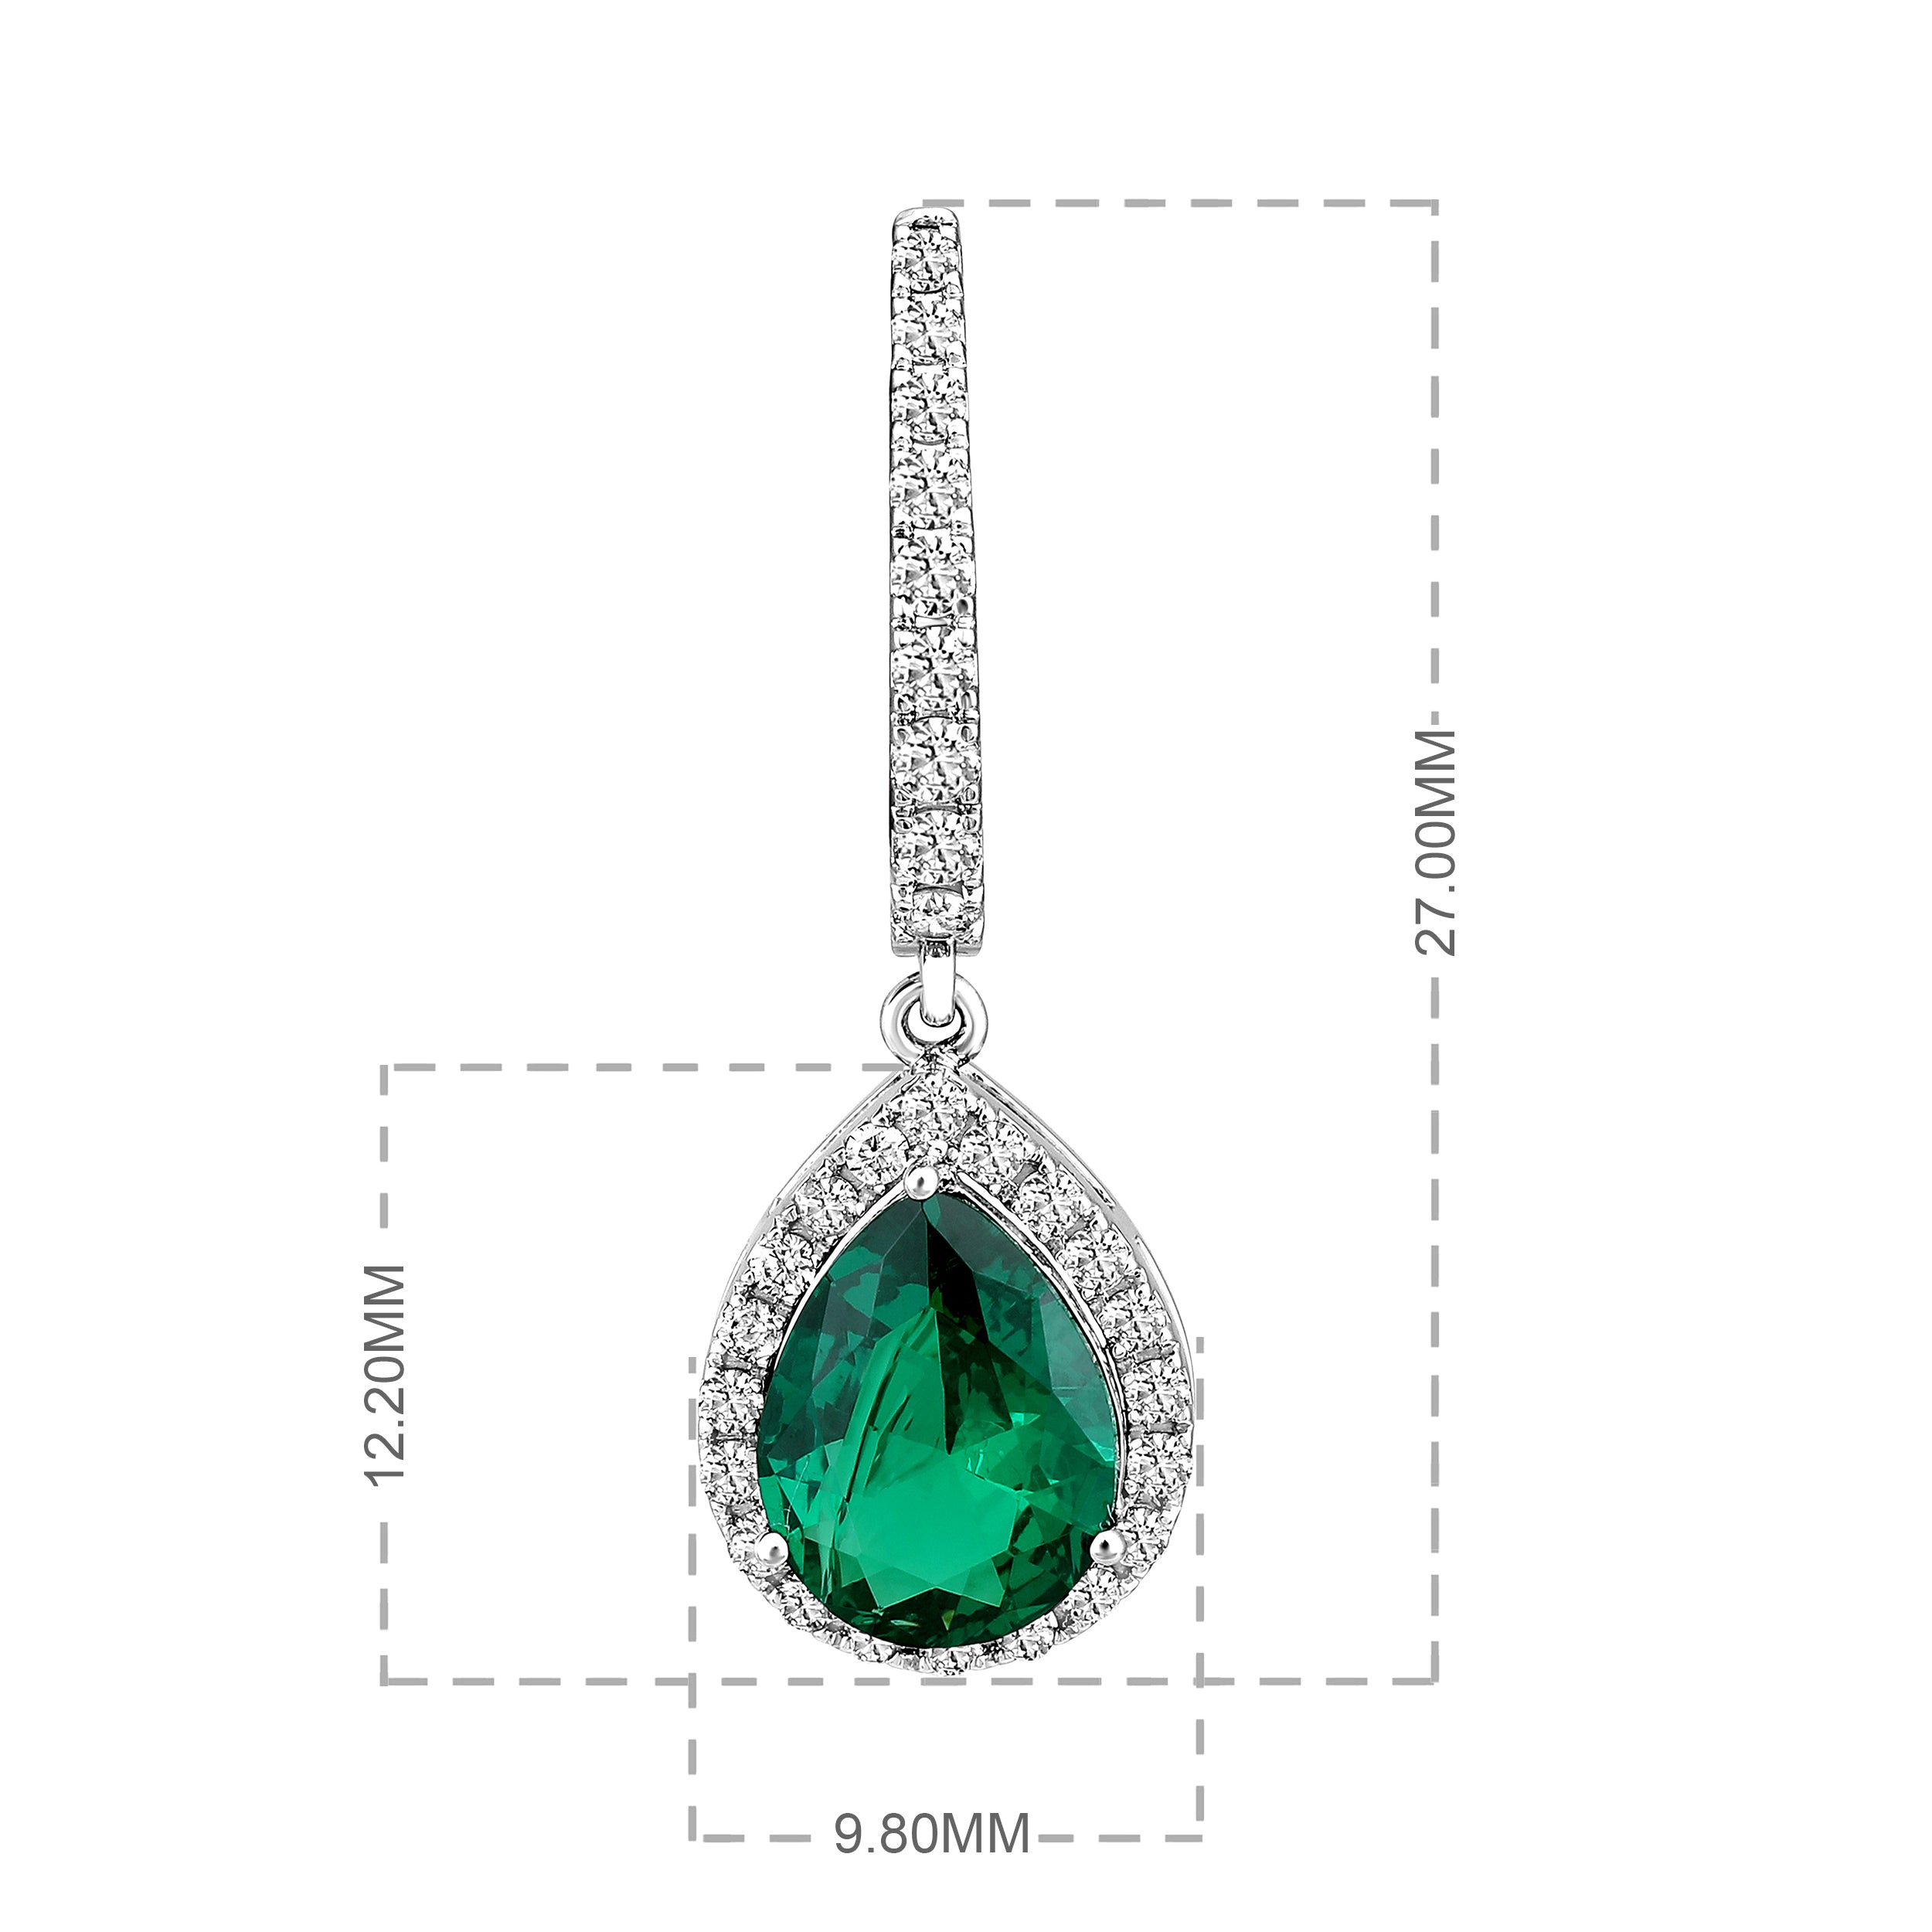 Certified 14K Gold 3.3ct Natural Diamond w/ Simulated Emerald Pear Drop Dangle White Earrings